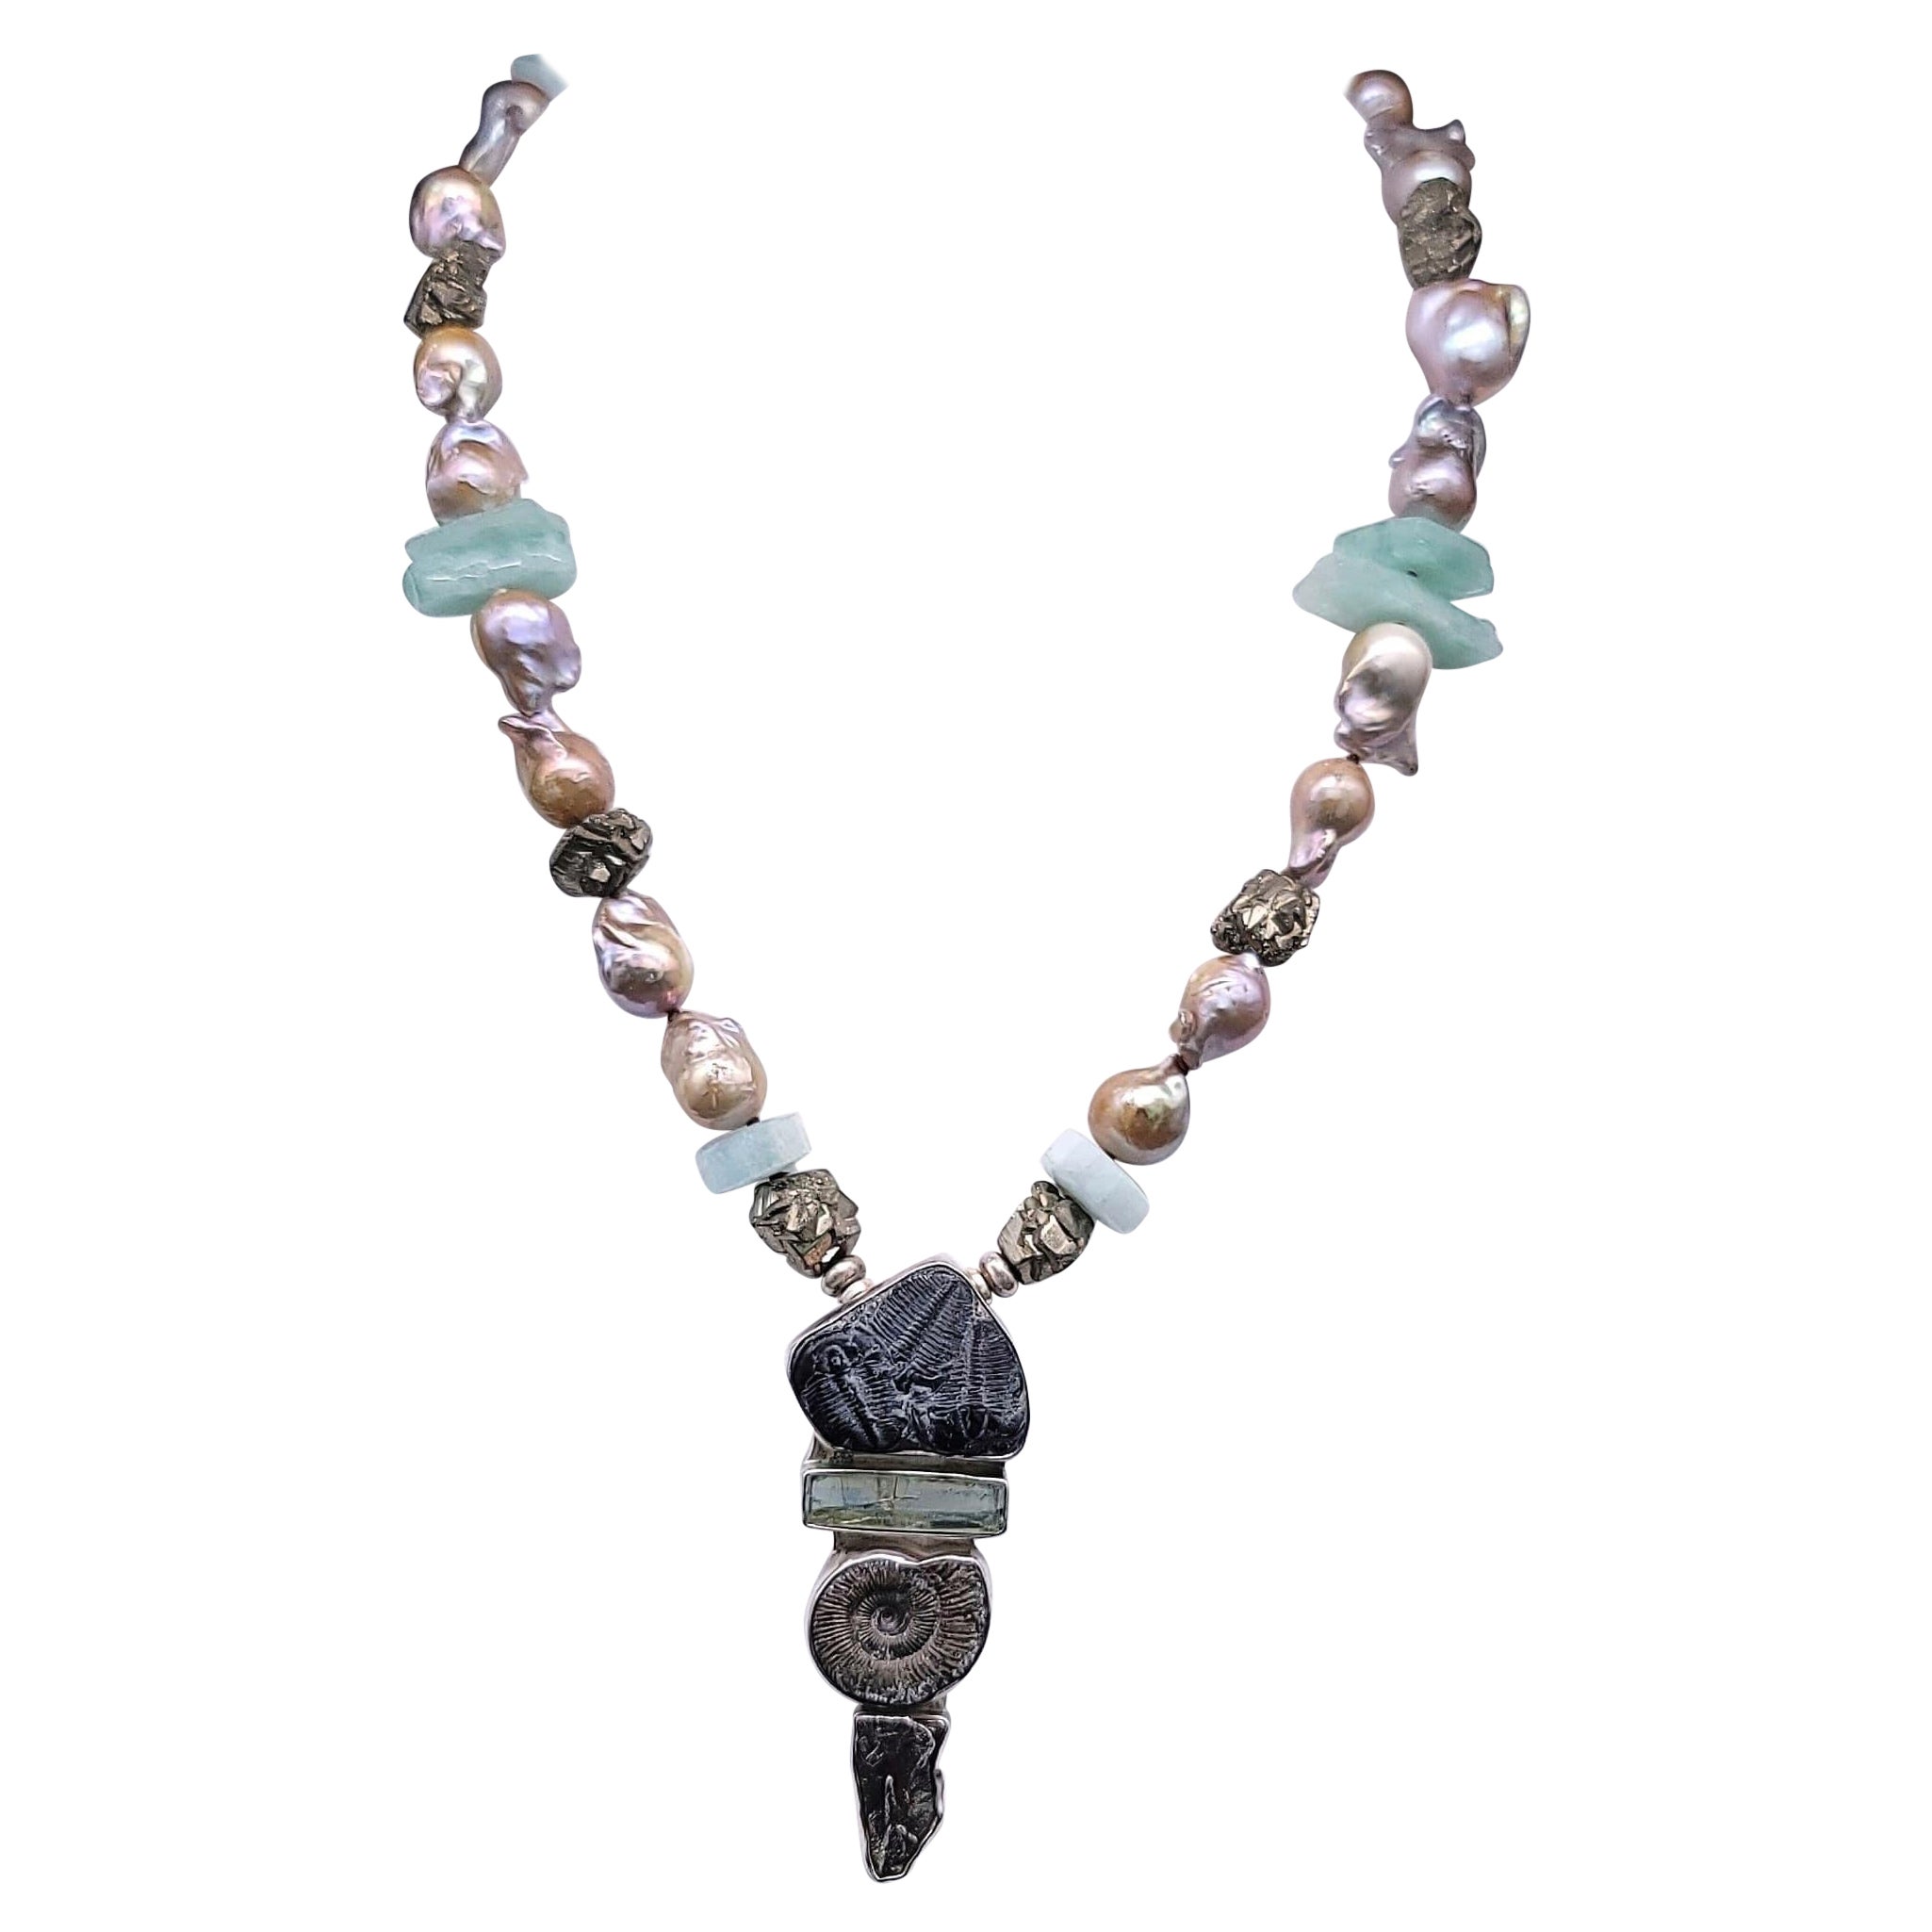 A.Jeschel Baroque Pearl and Aquamarine Necklace with Fine Roman Glass Pendant. For Sale